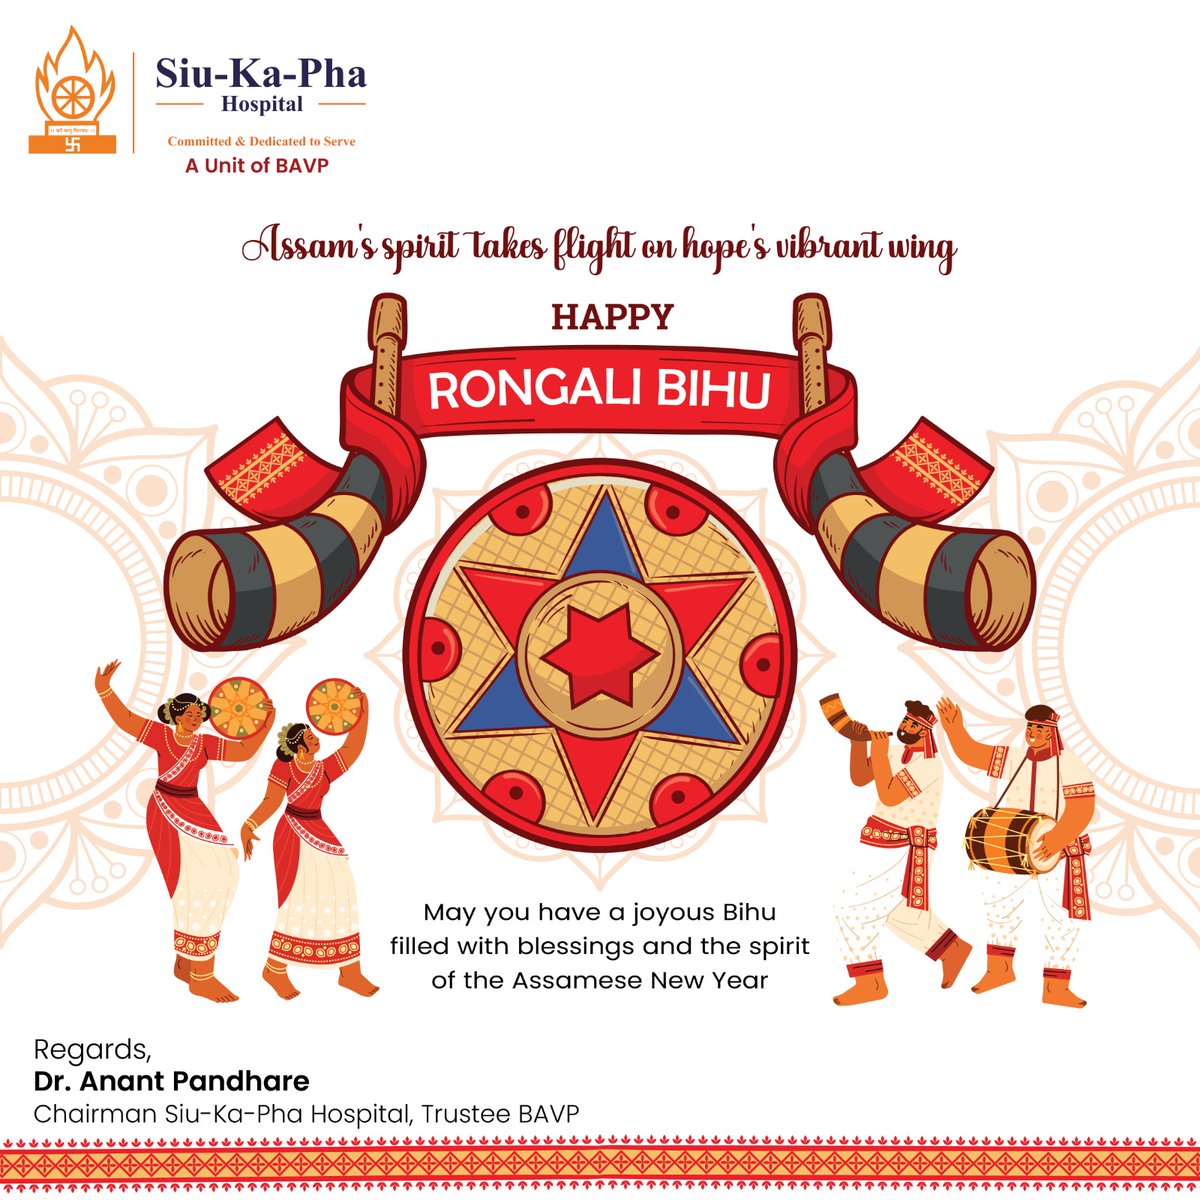 Happy Rongali Bihu!Assam's spirit soars on hope's vibrant wing. May your celebrations be filled with joy, blessings, and the vibrant essence of the Assamese New Year. 
#assam #siukapha #siukaphahospital #siukaphacare #health #hospital  #RongaliBihu #AssameseNewYear #Celebration